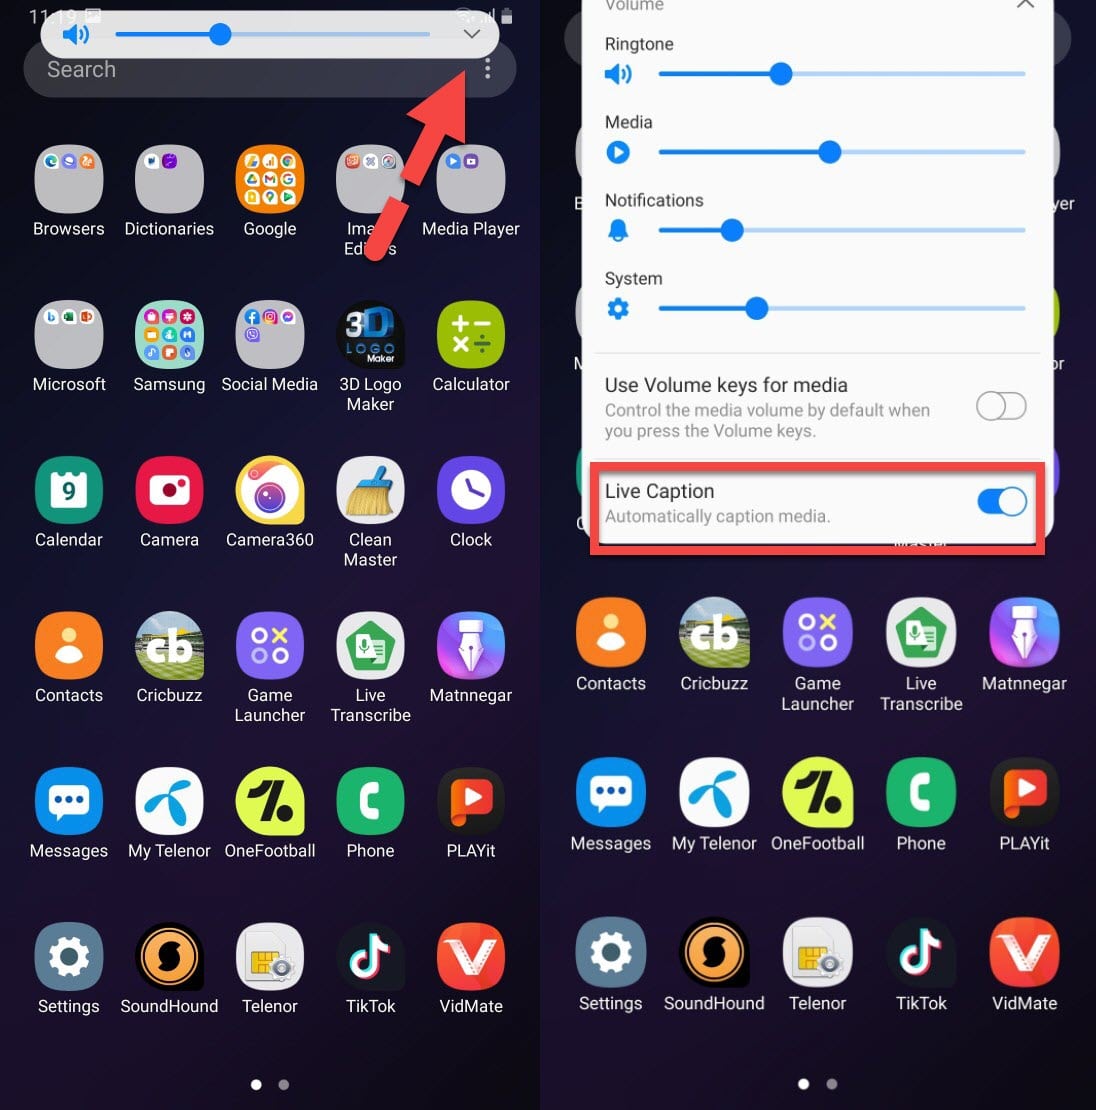 How to Turn on Live Caption on Samsung Galaxy S9, S10 One UI 2.5